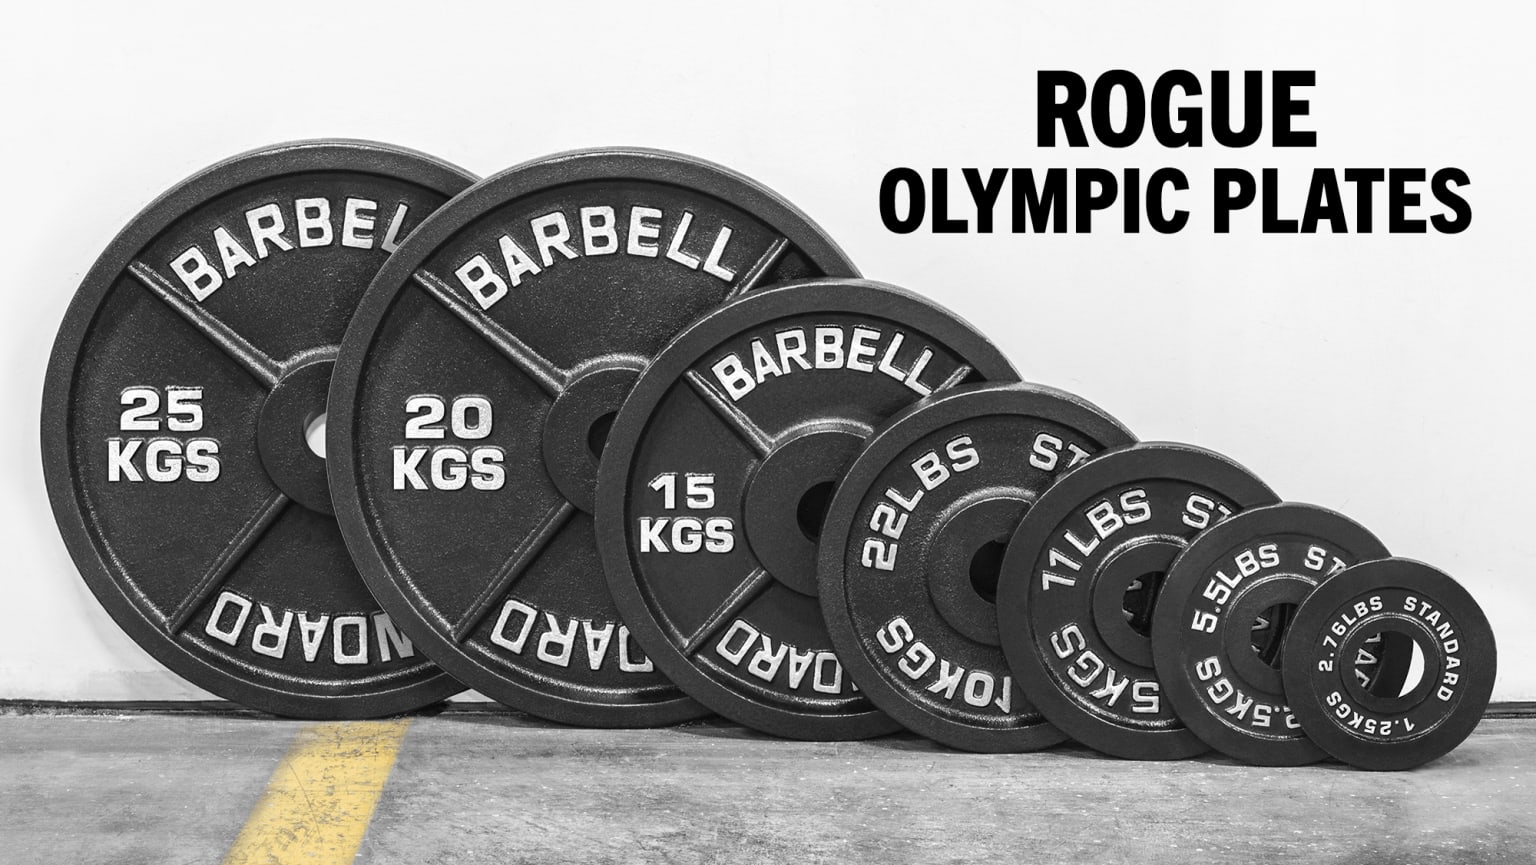 Rogue Olympic Plates Weightlifting